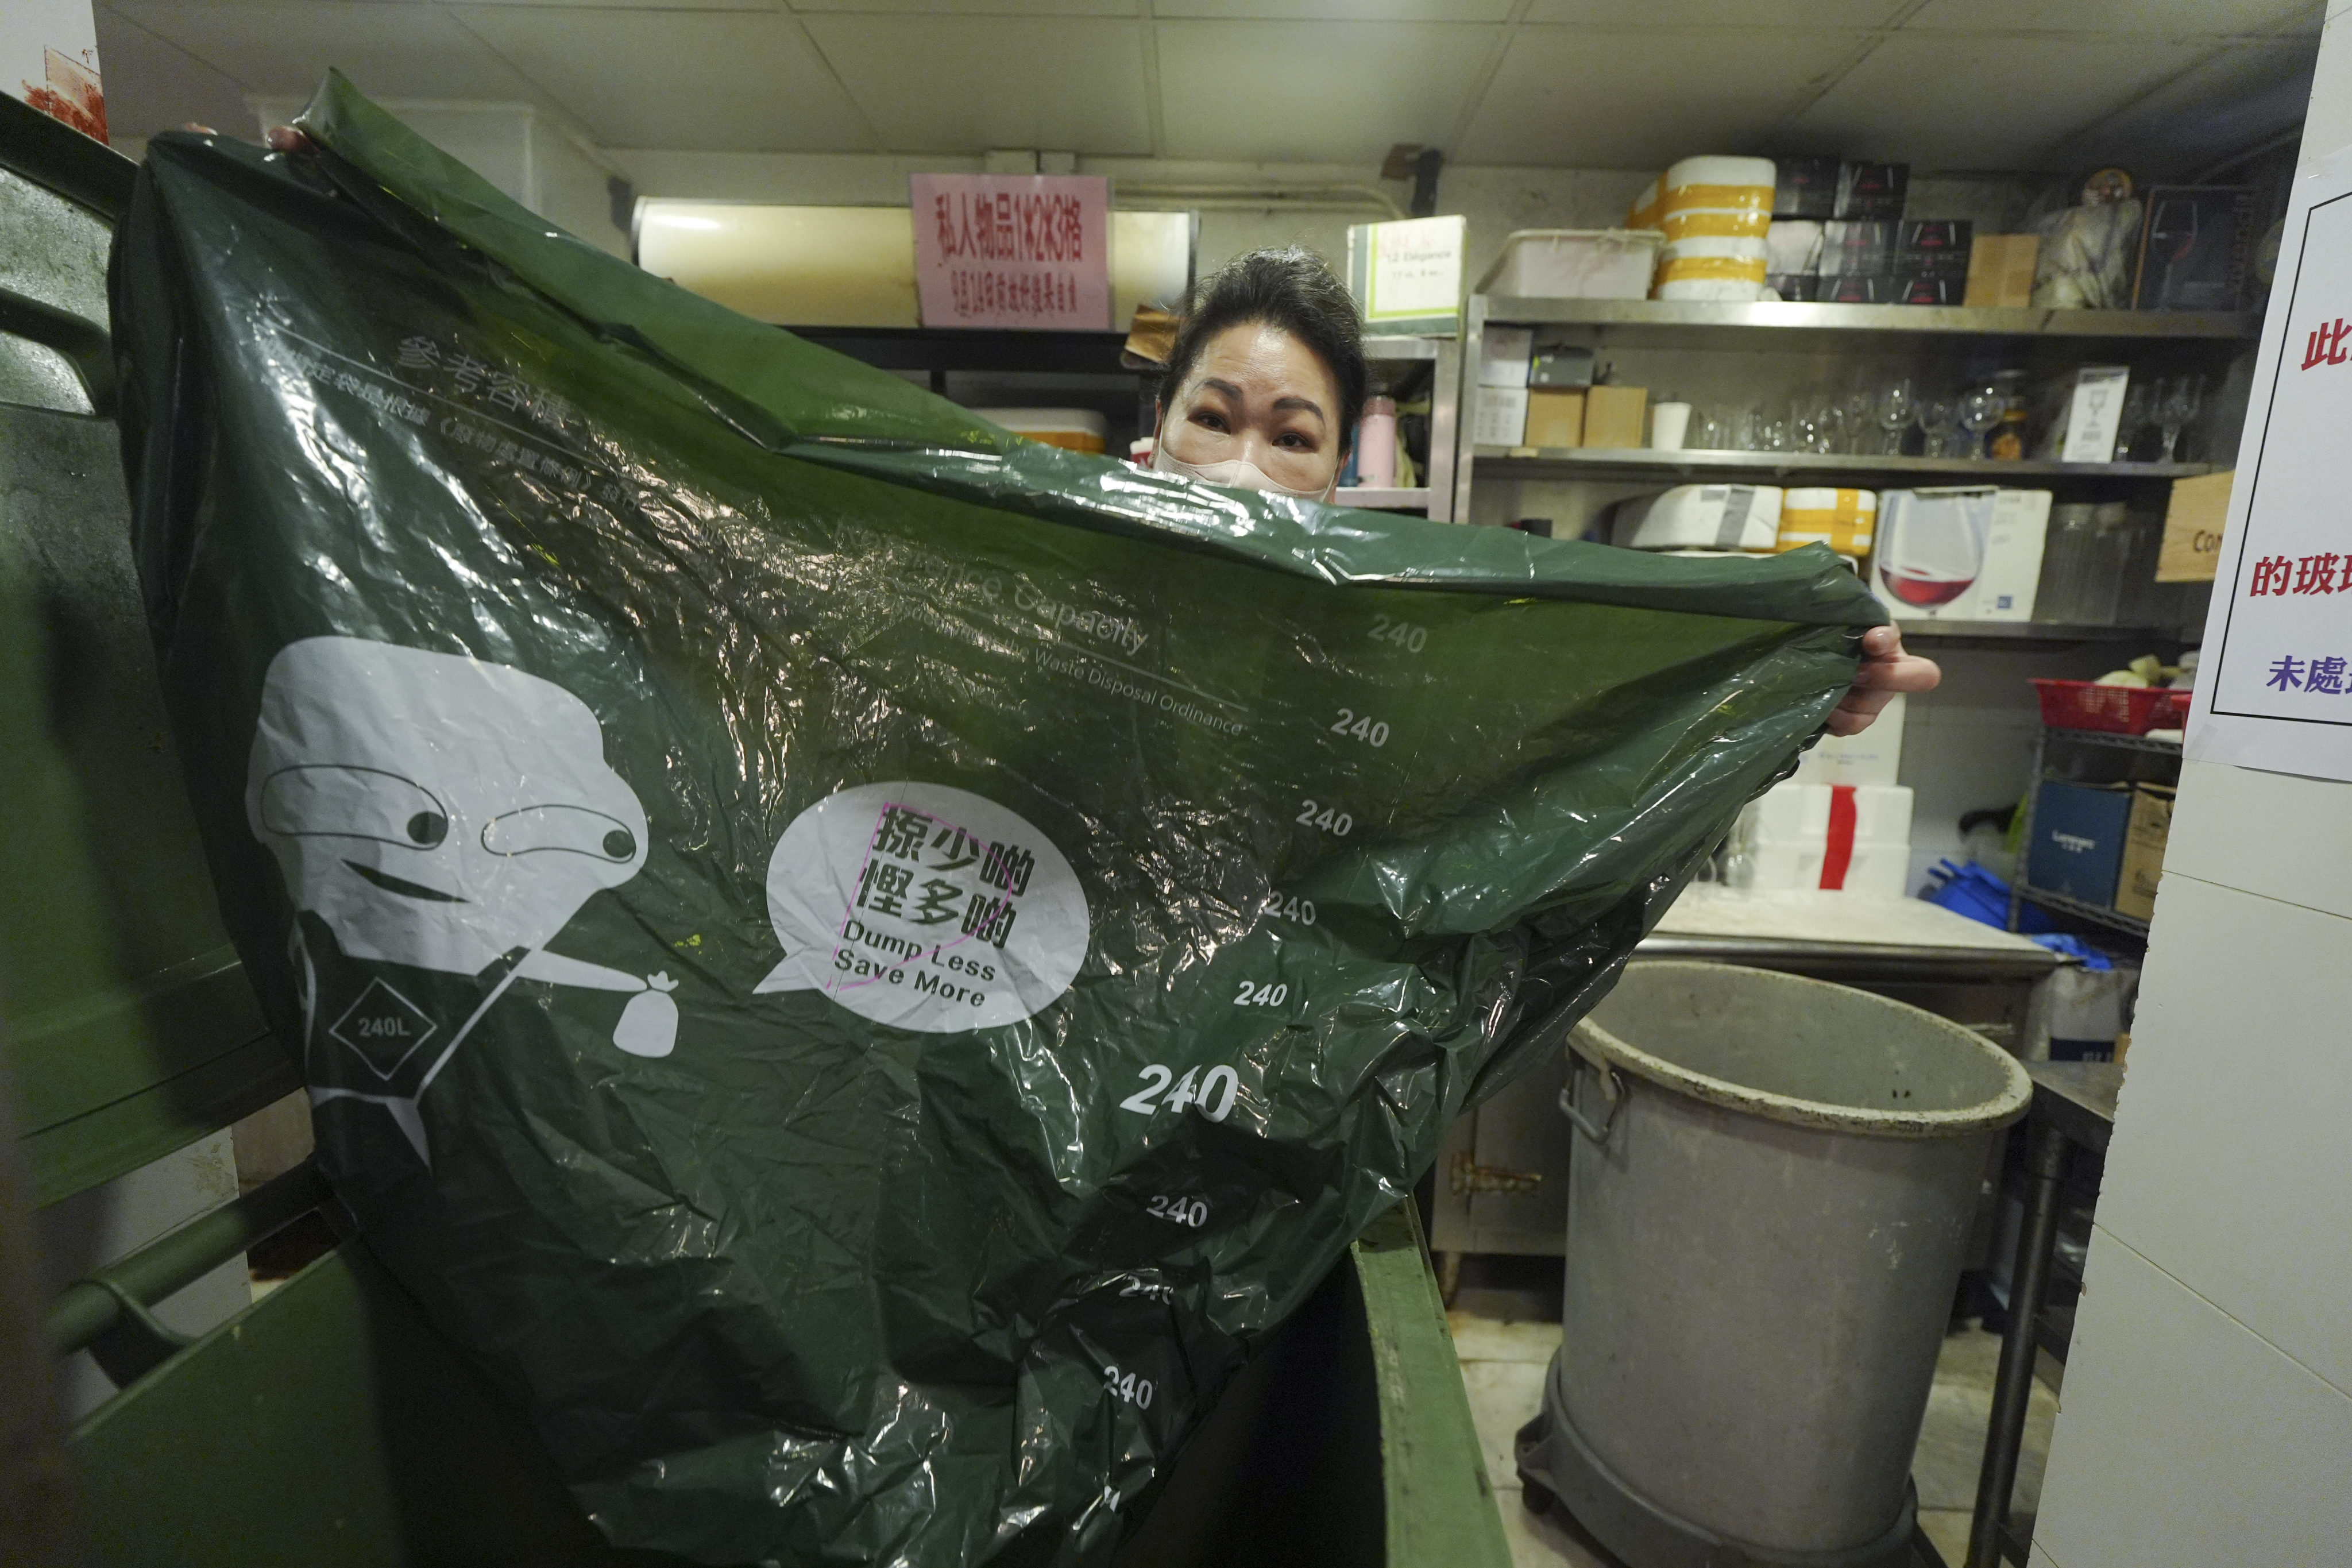 Designated bags used for the waste-charging scheme, which is set to roll out on August 1. Photo: Eugene Lee